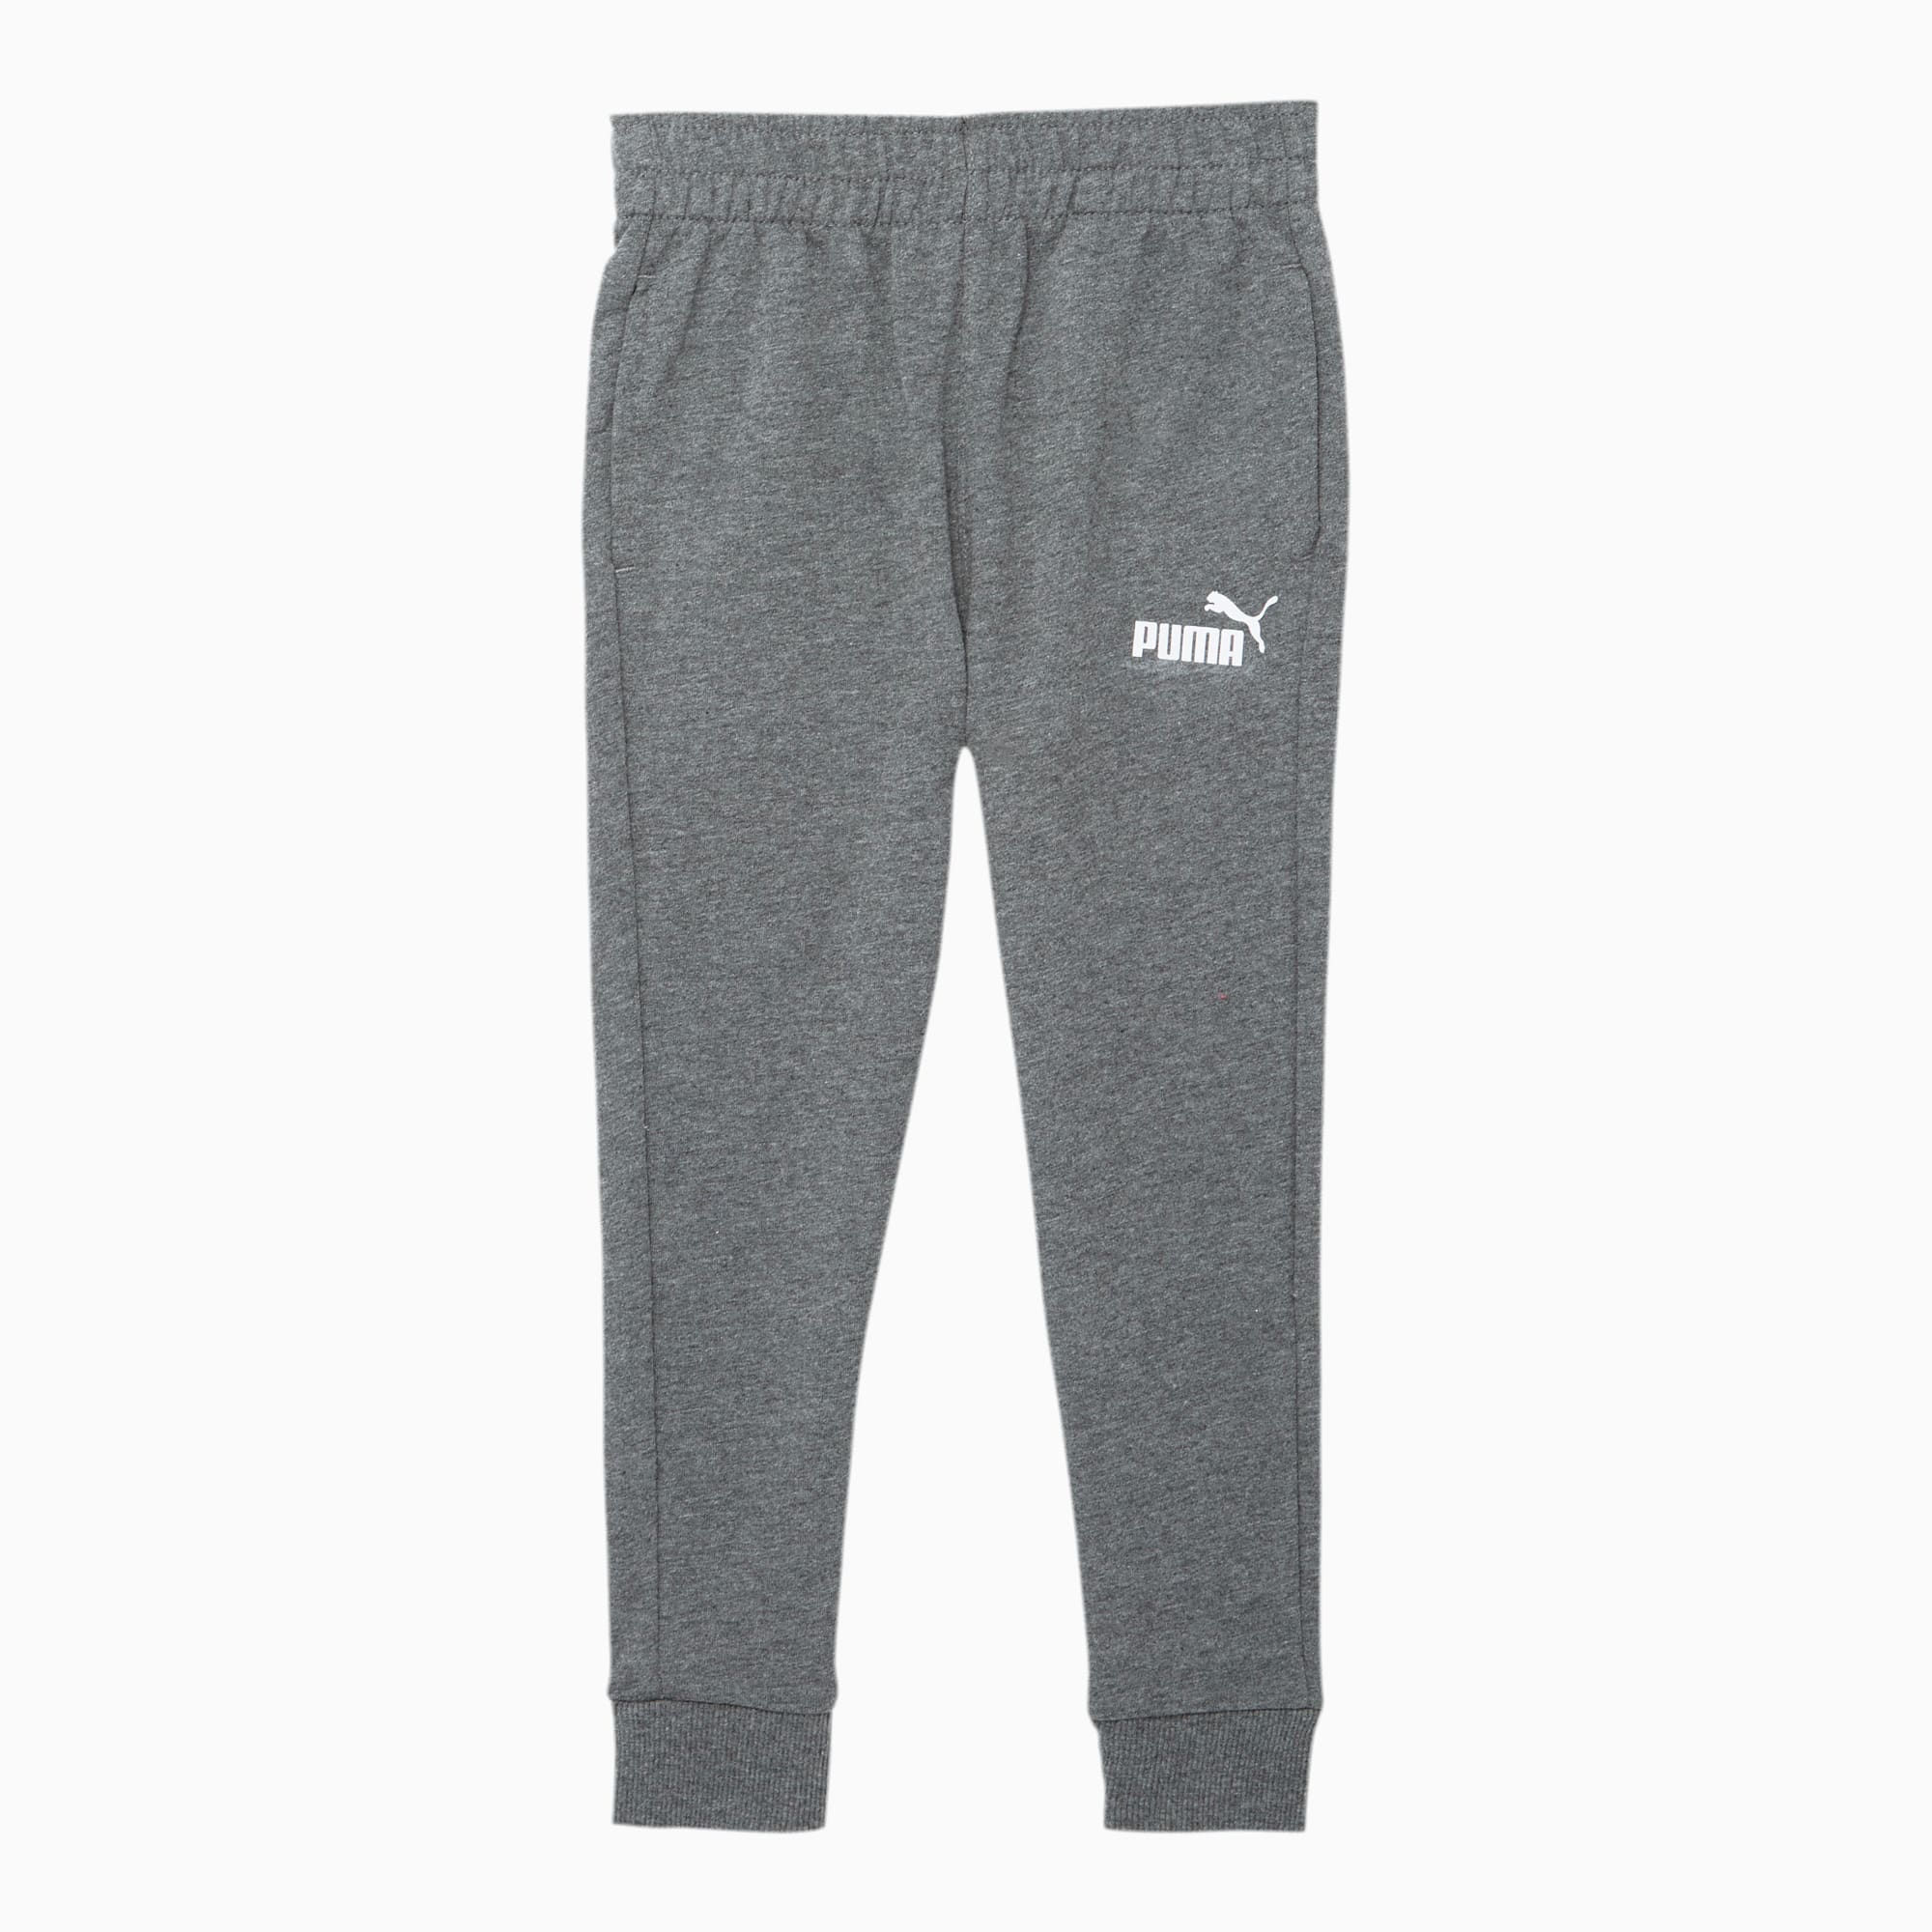 puma french terry pants